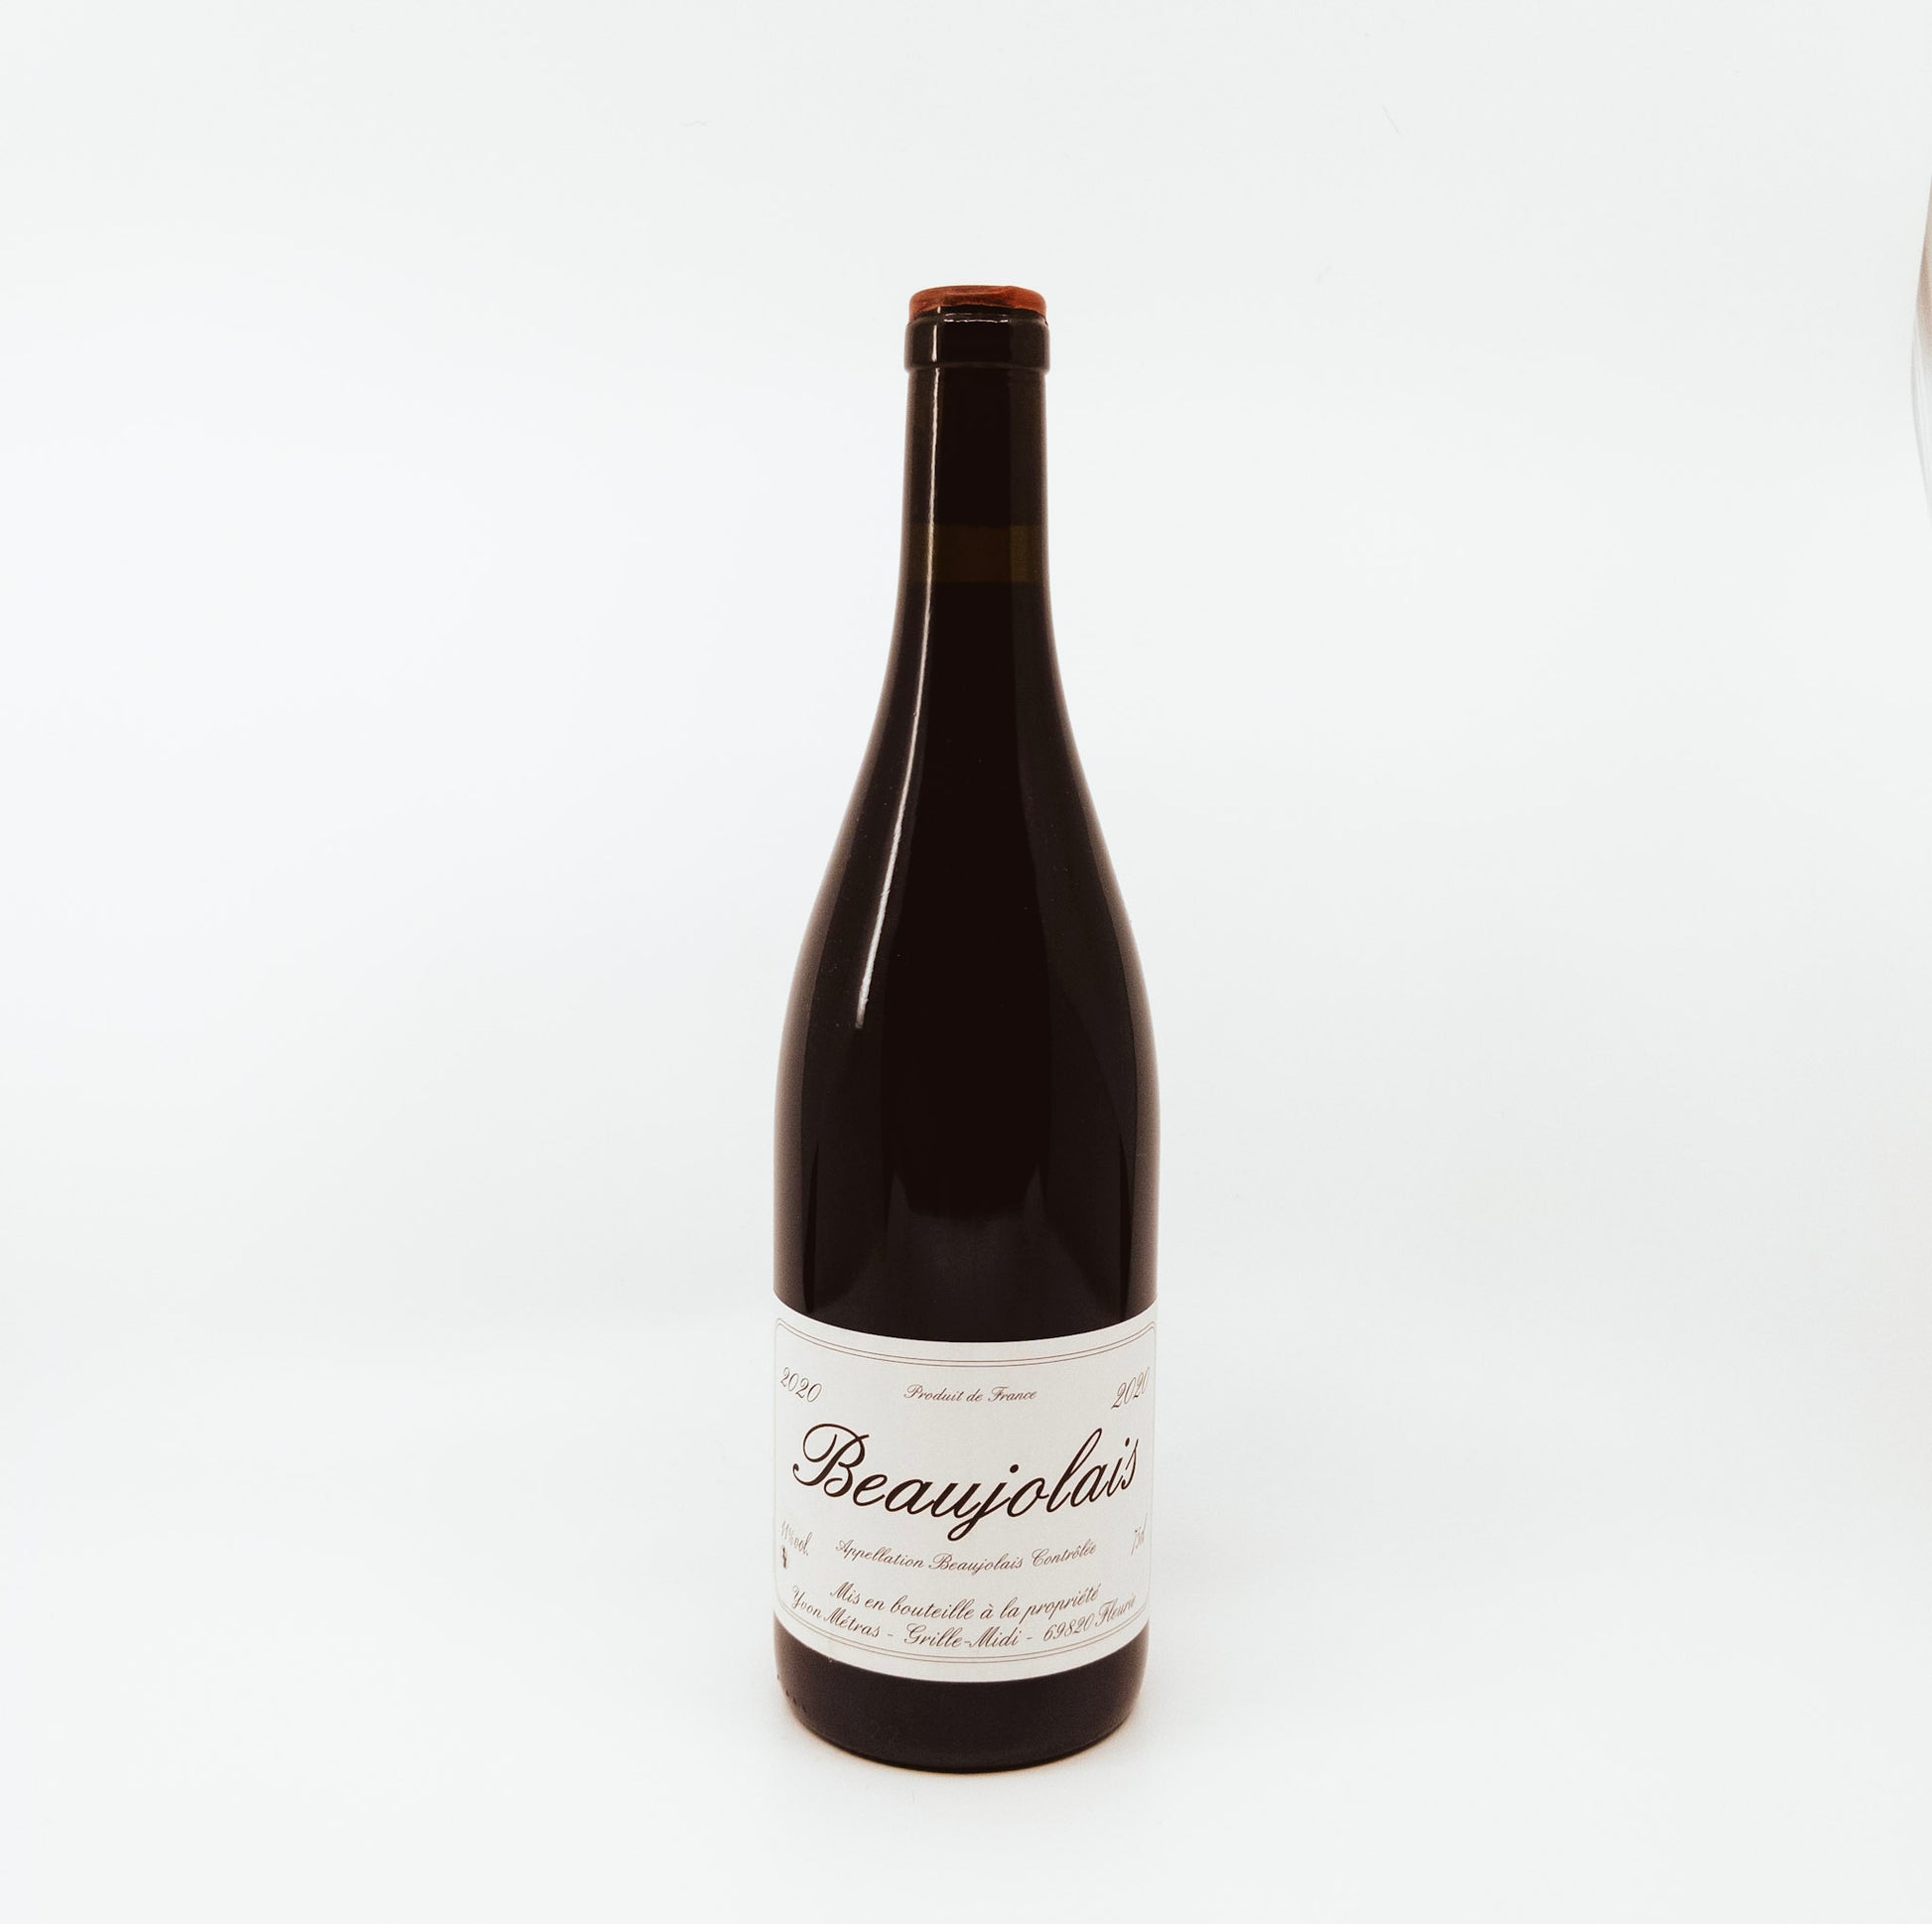 dark bottle with cursive writing on label